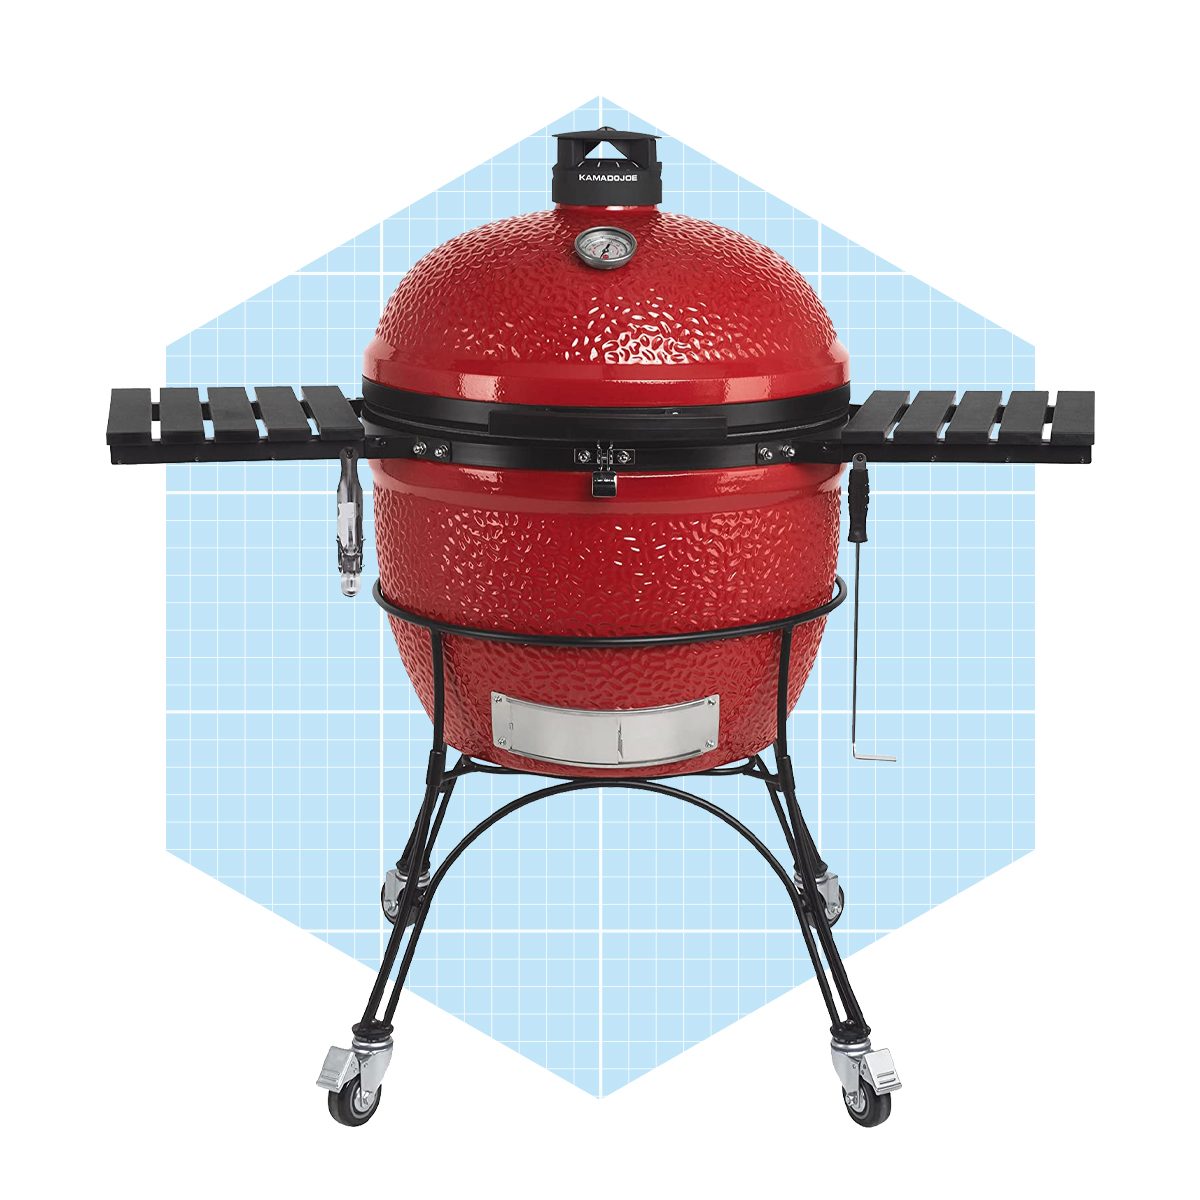 The Best Black Friday Grill Sales and Deals of 2022